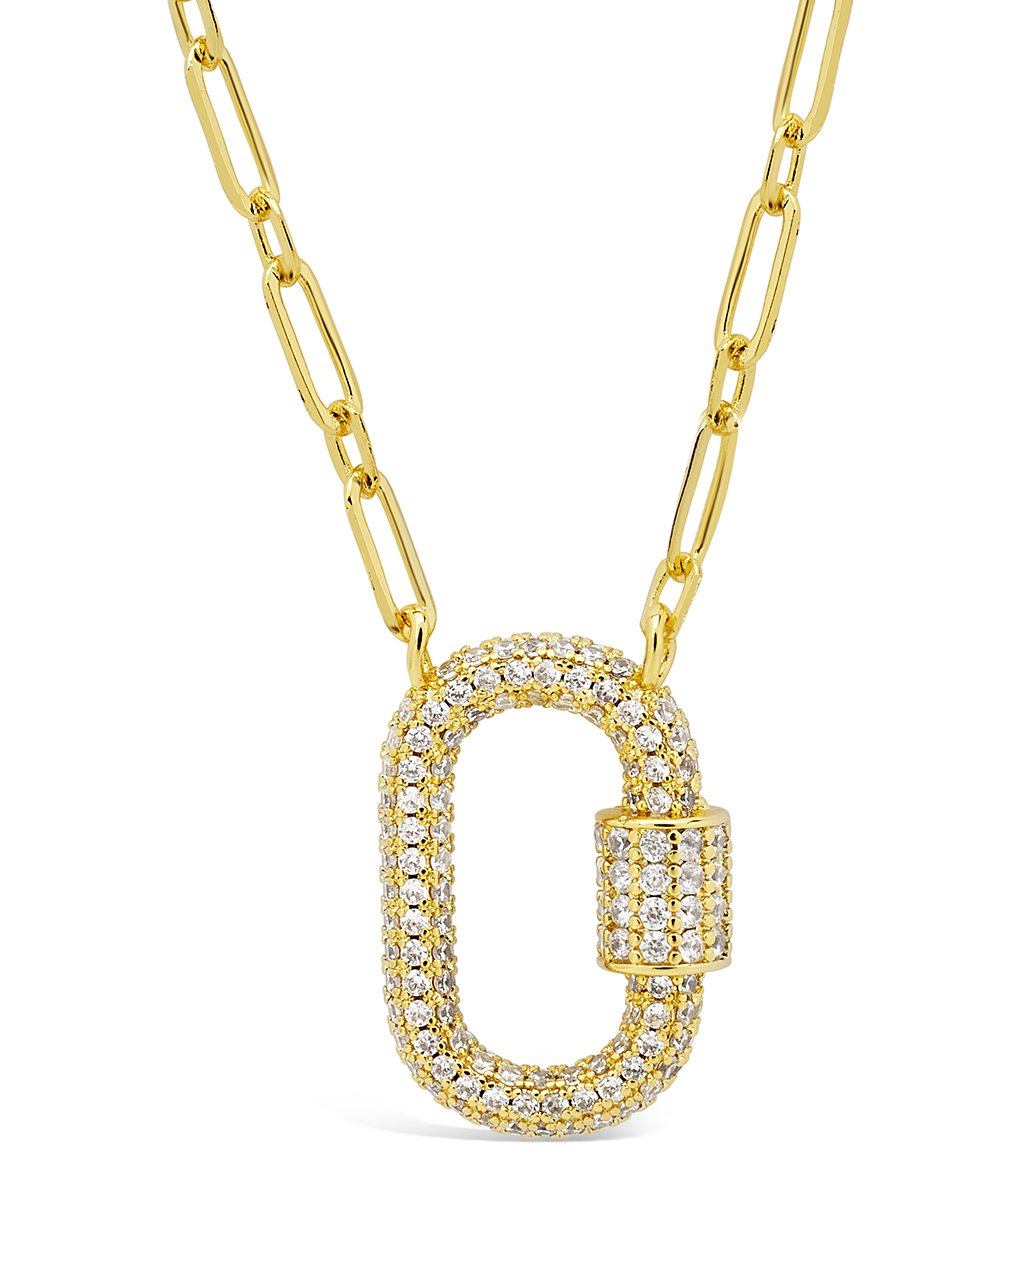 Pave CZ Carabiner Lock Necklace Necklace Sterling Forever Gold Clear